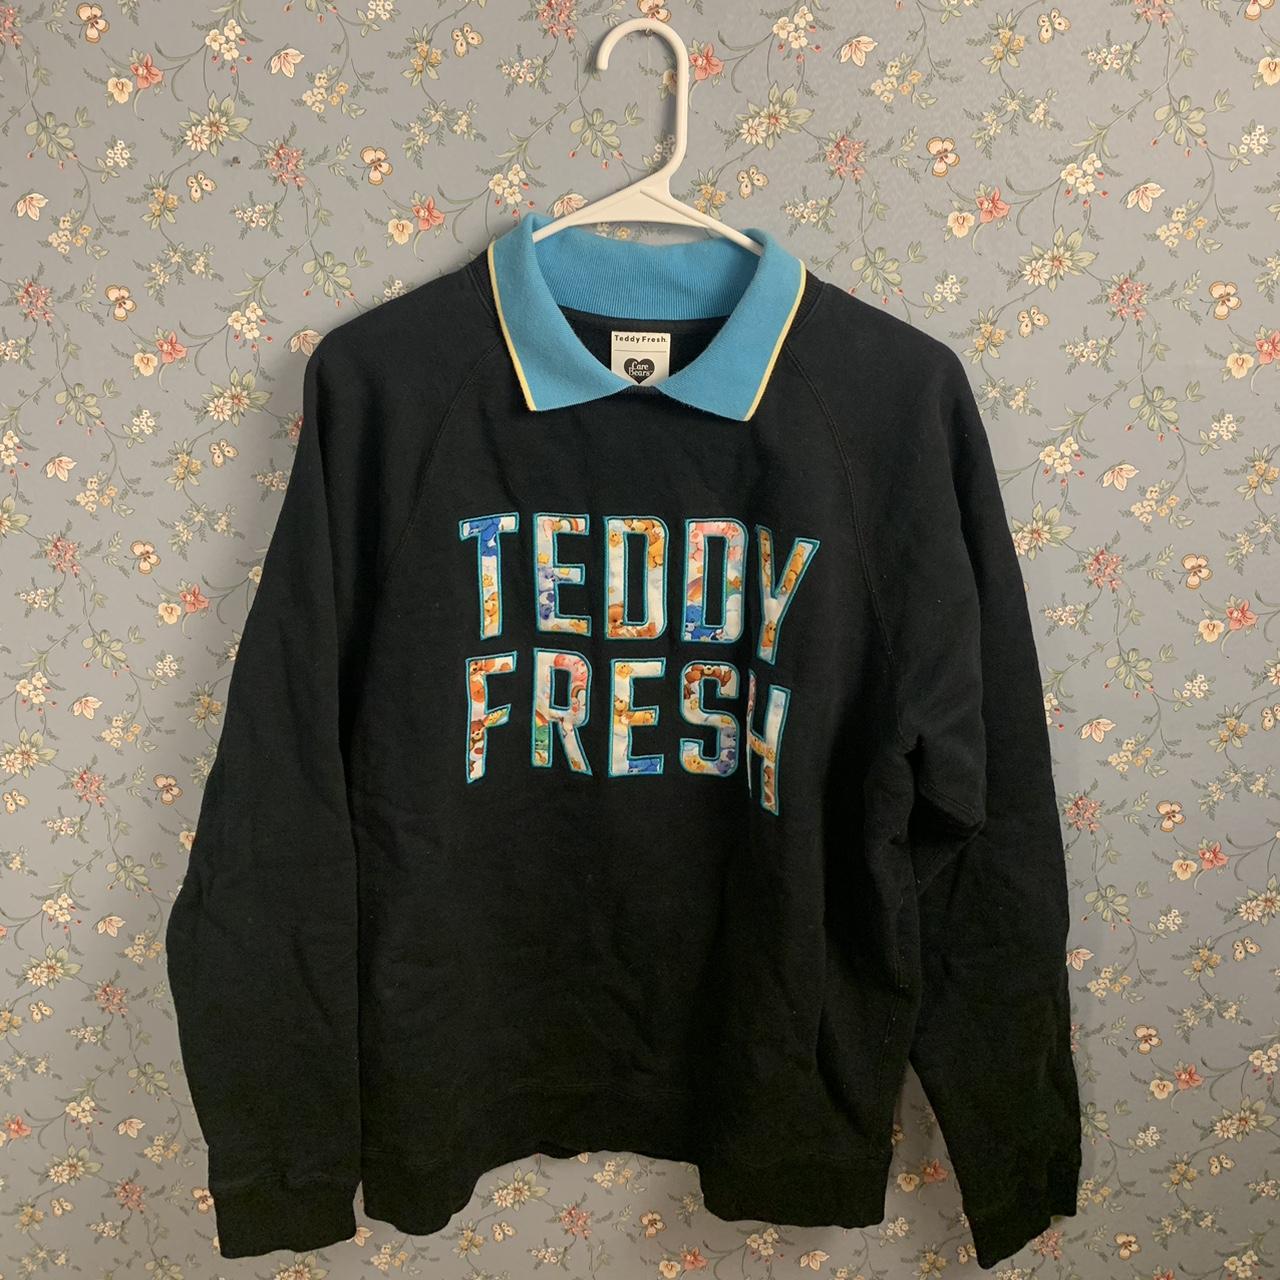 TEDDY FRESH Clothing for Men - Vestiaire Collective